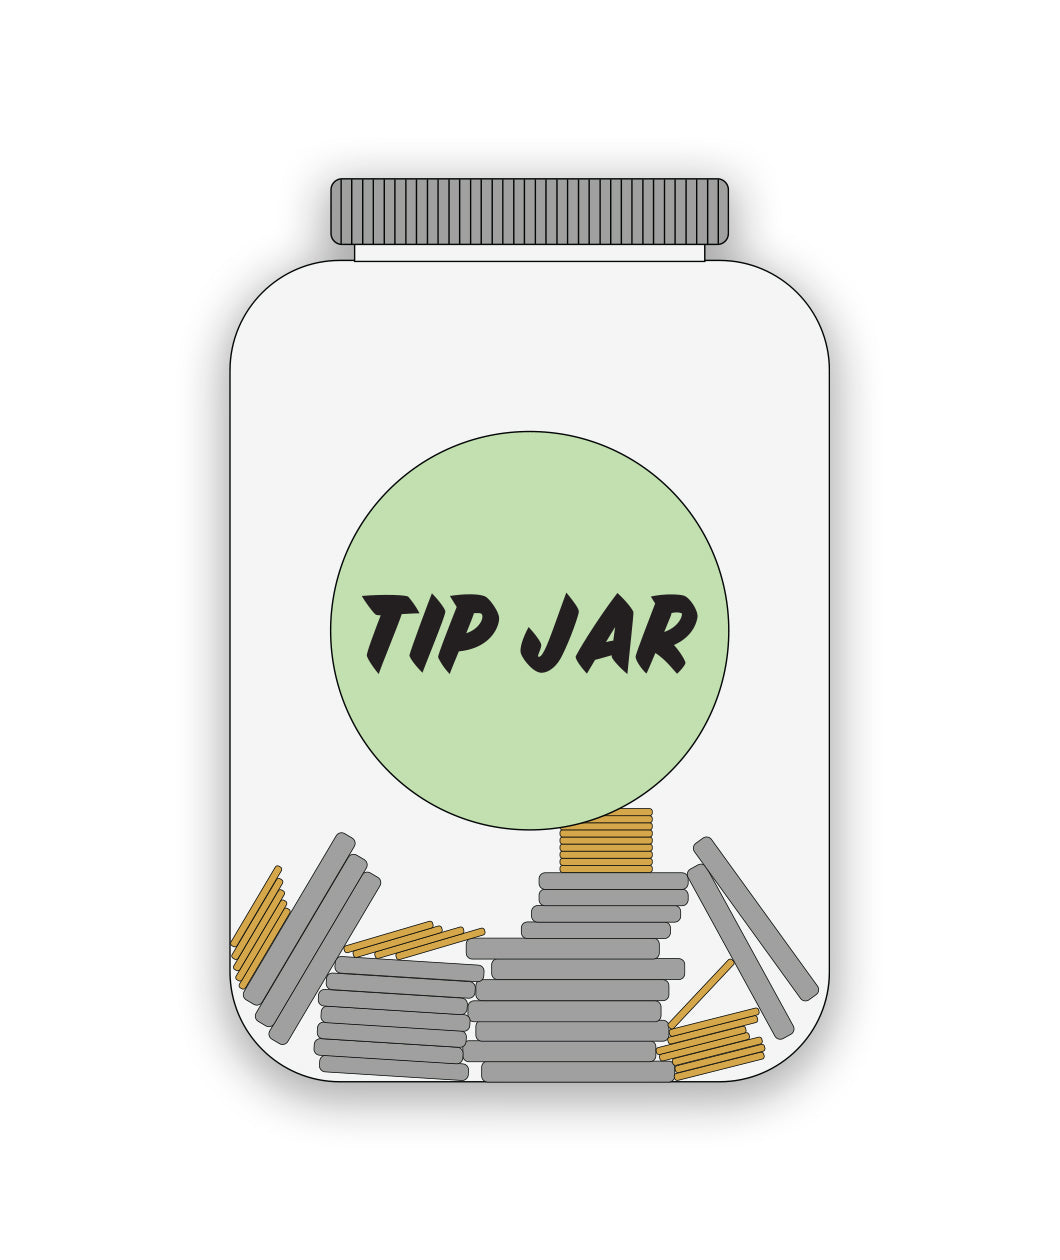 Join the Party Tip Jar (Plus a phone wallpaper!)